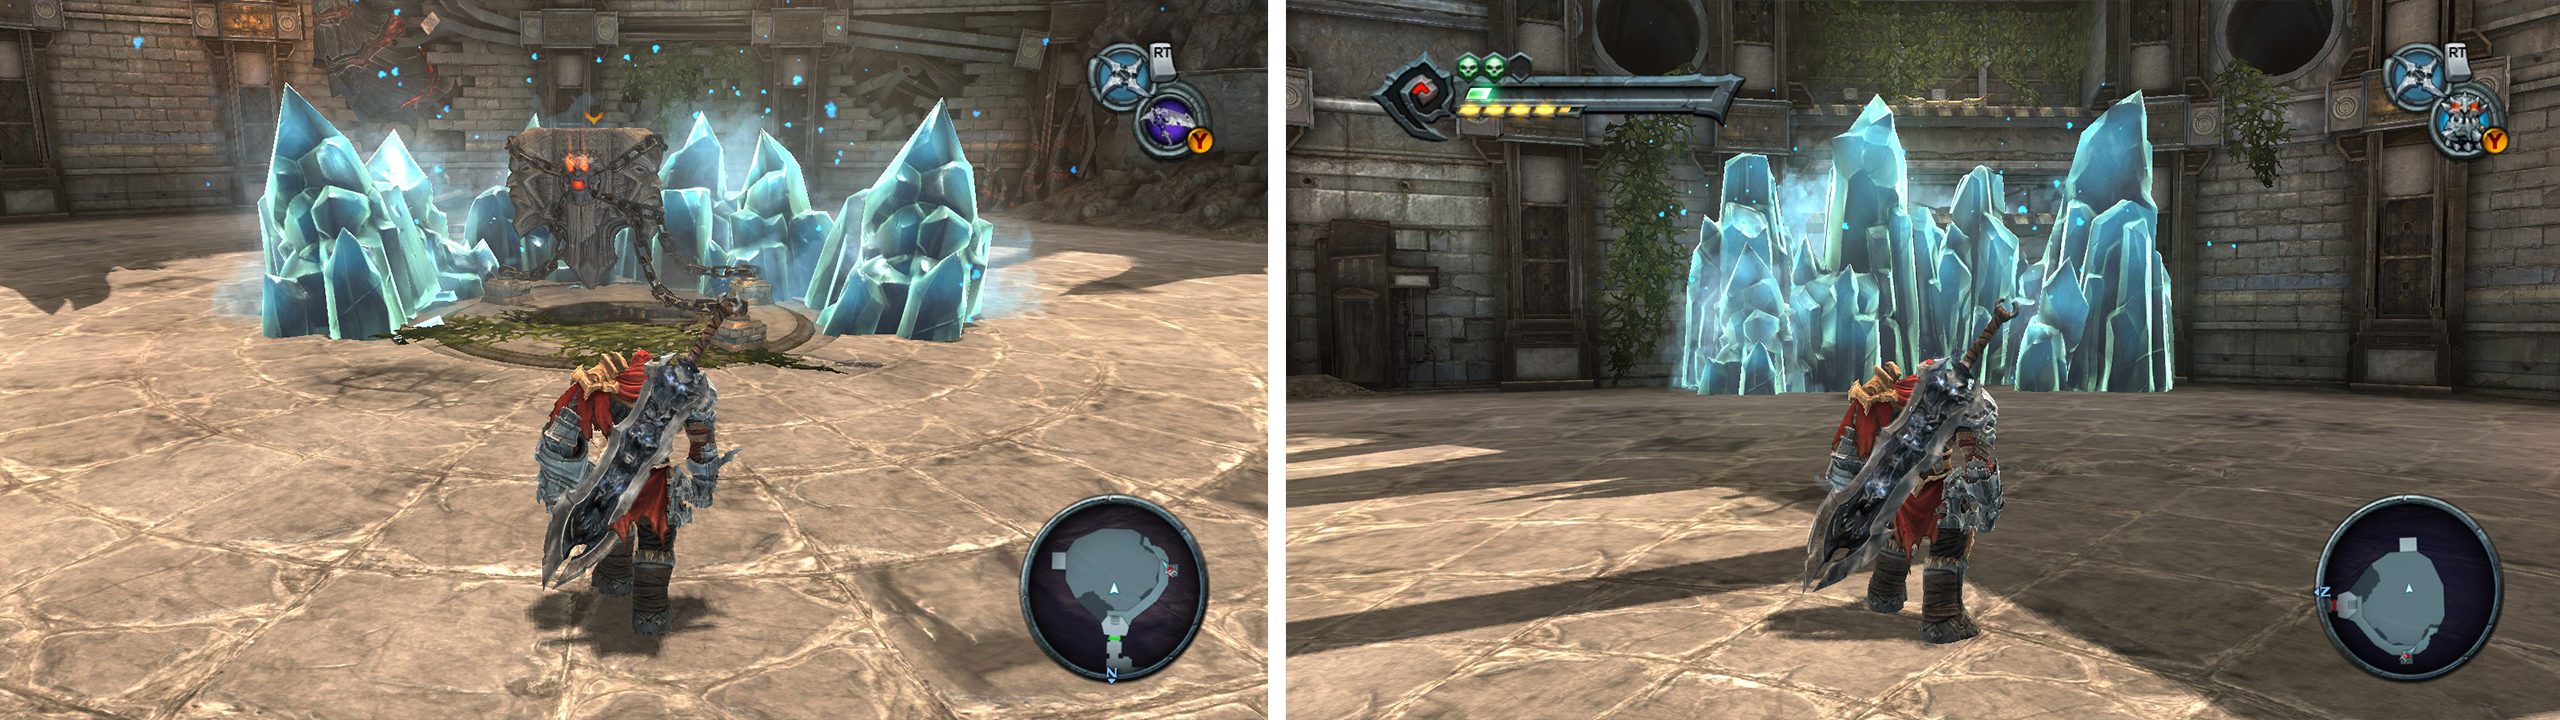 Grab the Tremor Gauntlet from the chest (left). Once you have killed all the bad guys, destroy the blue crystals (right) and climb up for a Beholders Key.